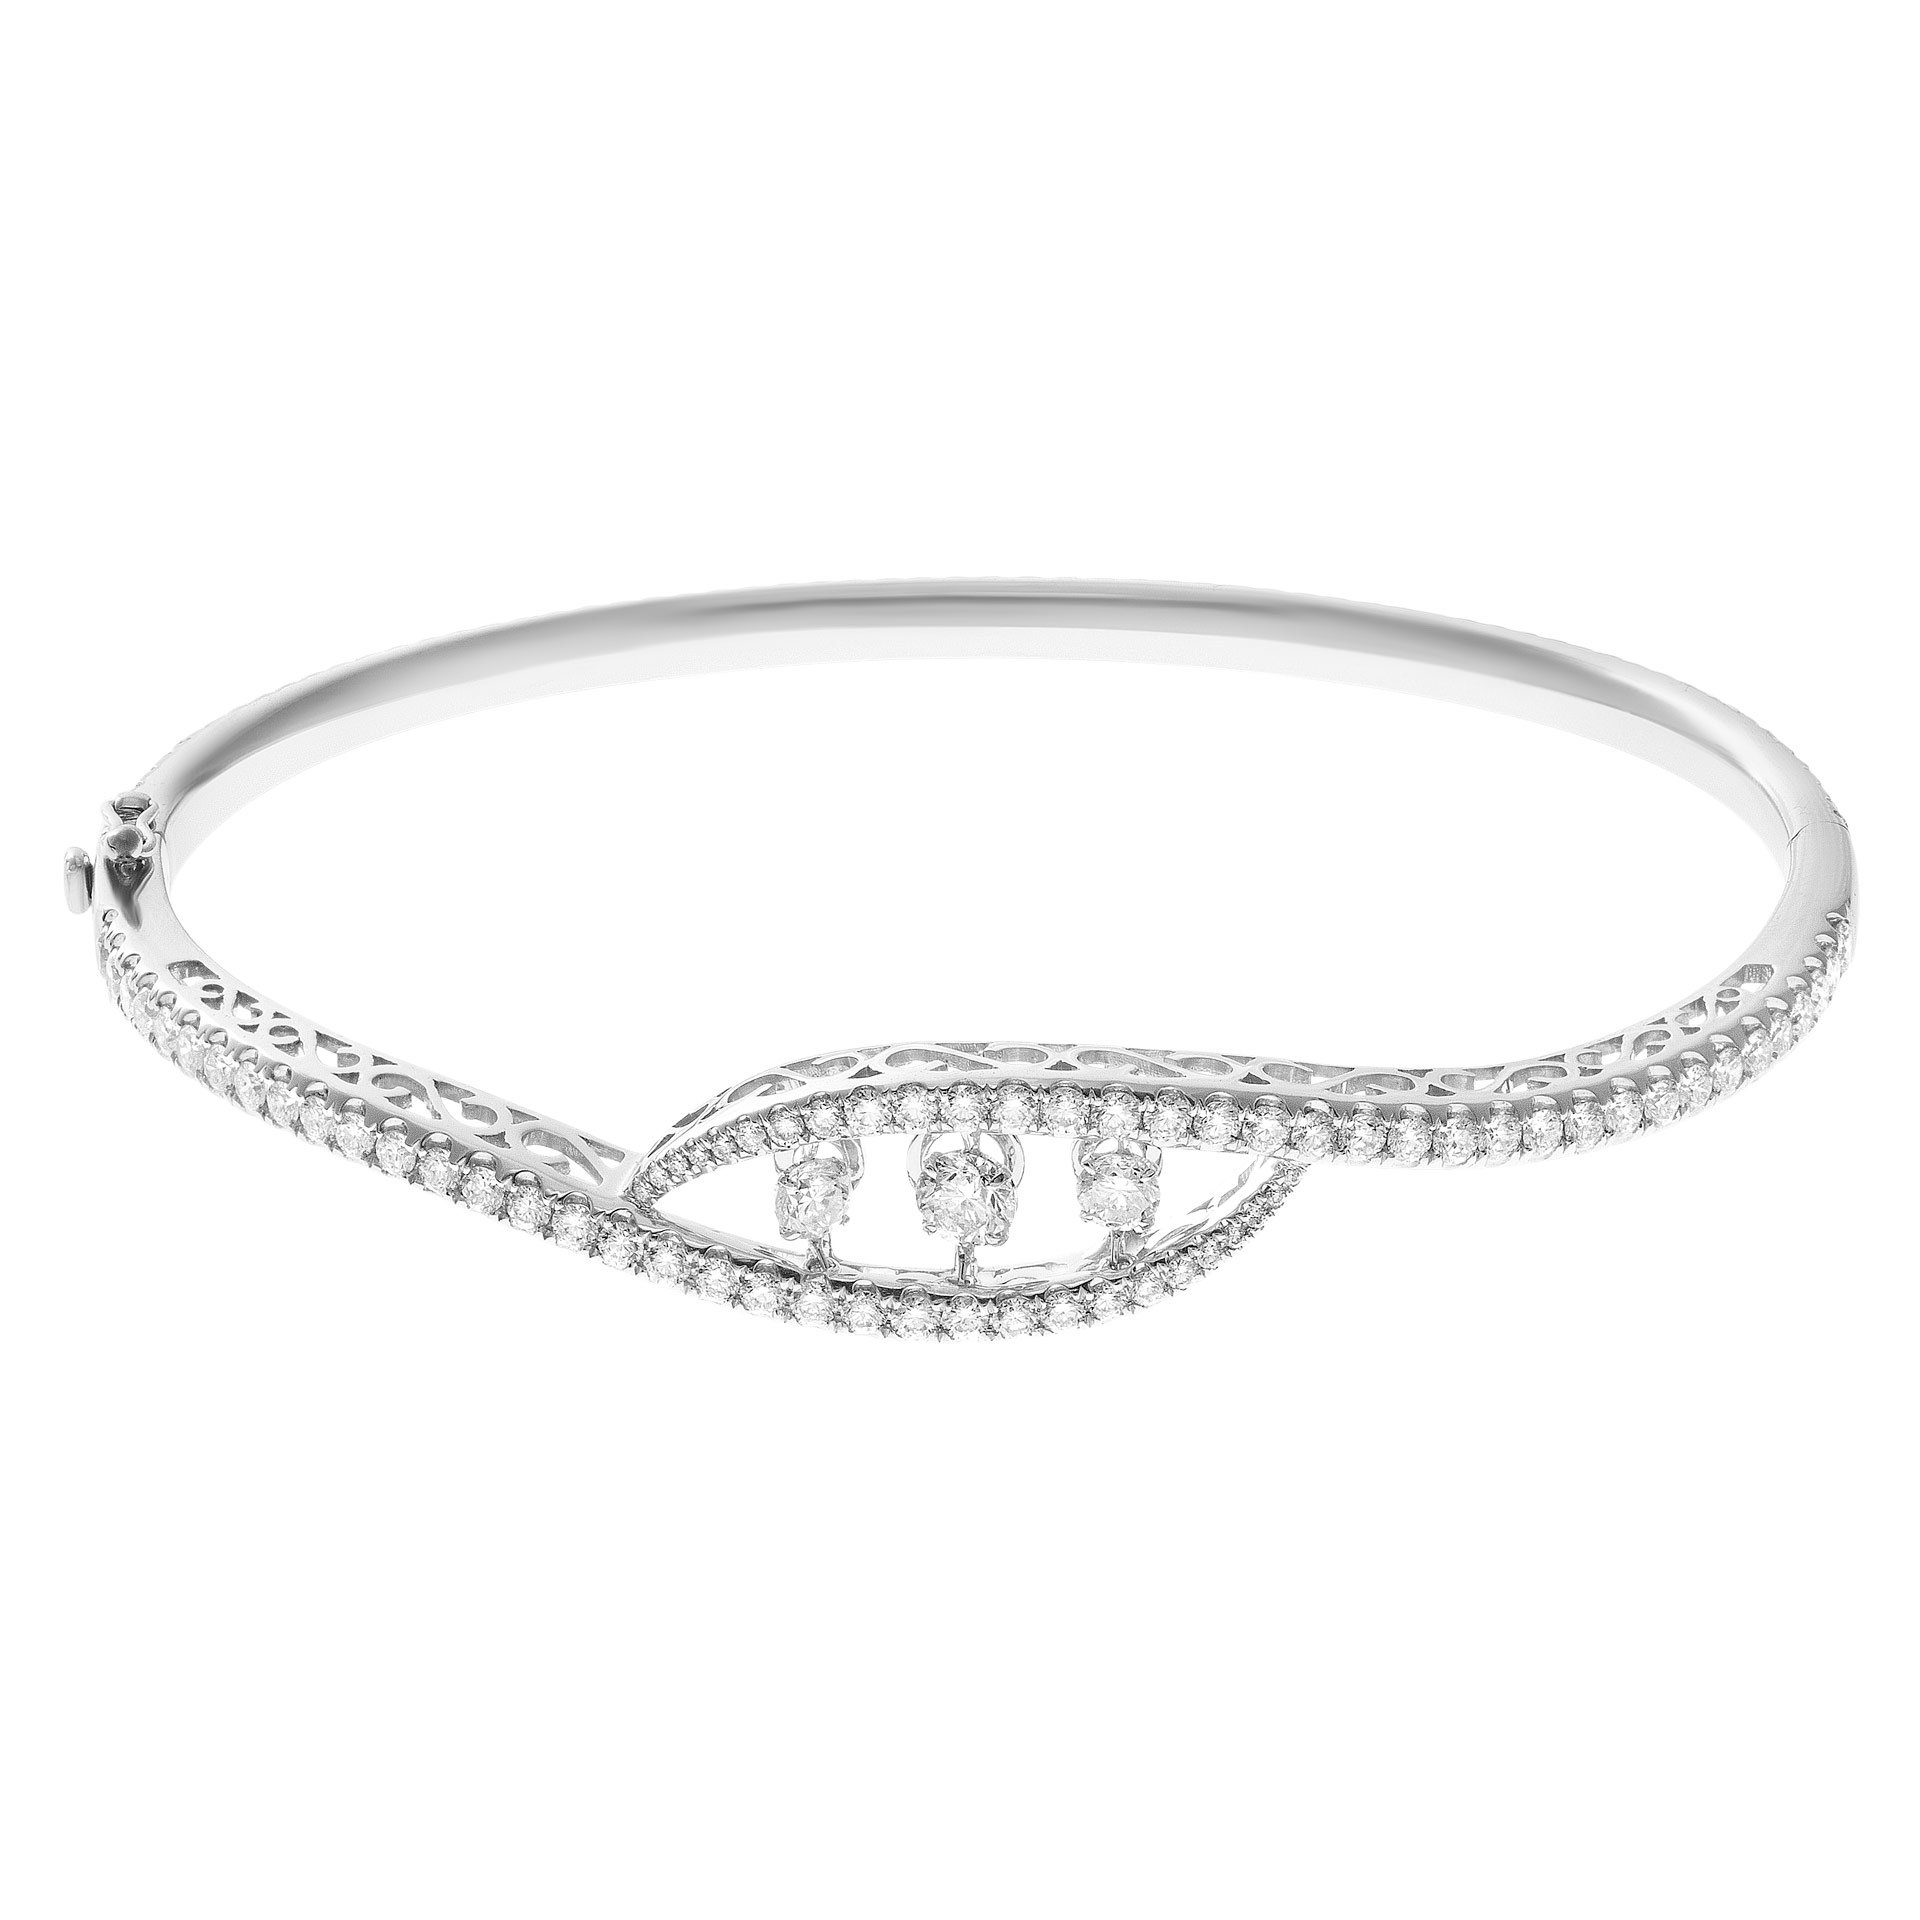 Dancing Diamond bangle in 18k white gold with 3.14cts in diamonds